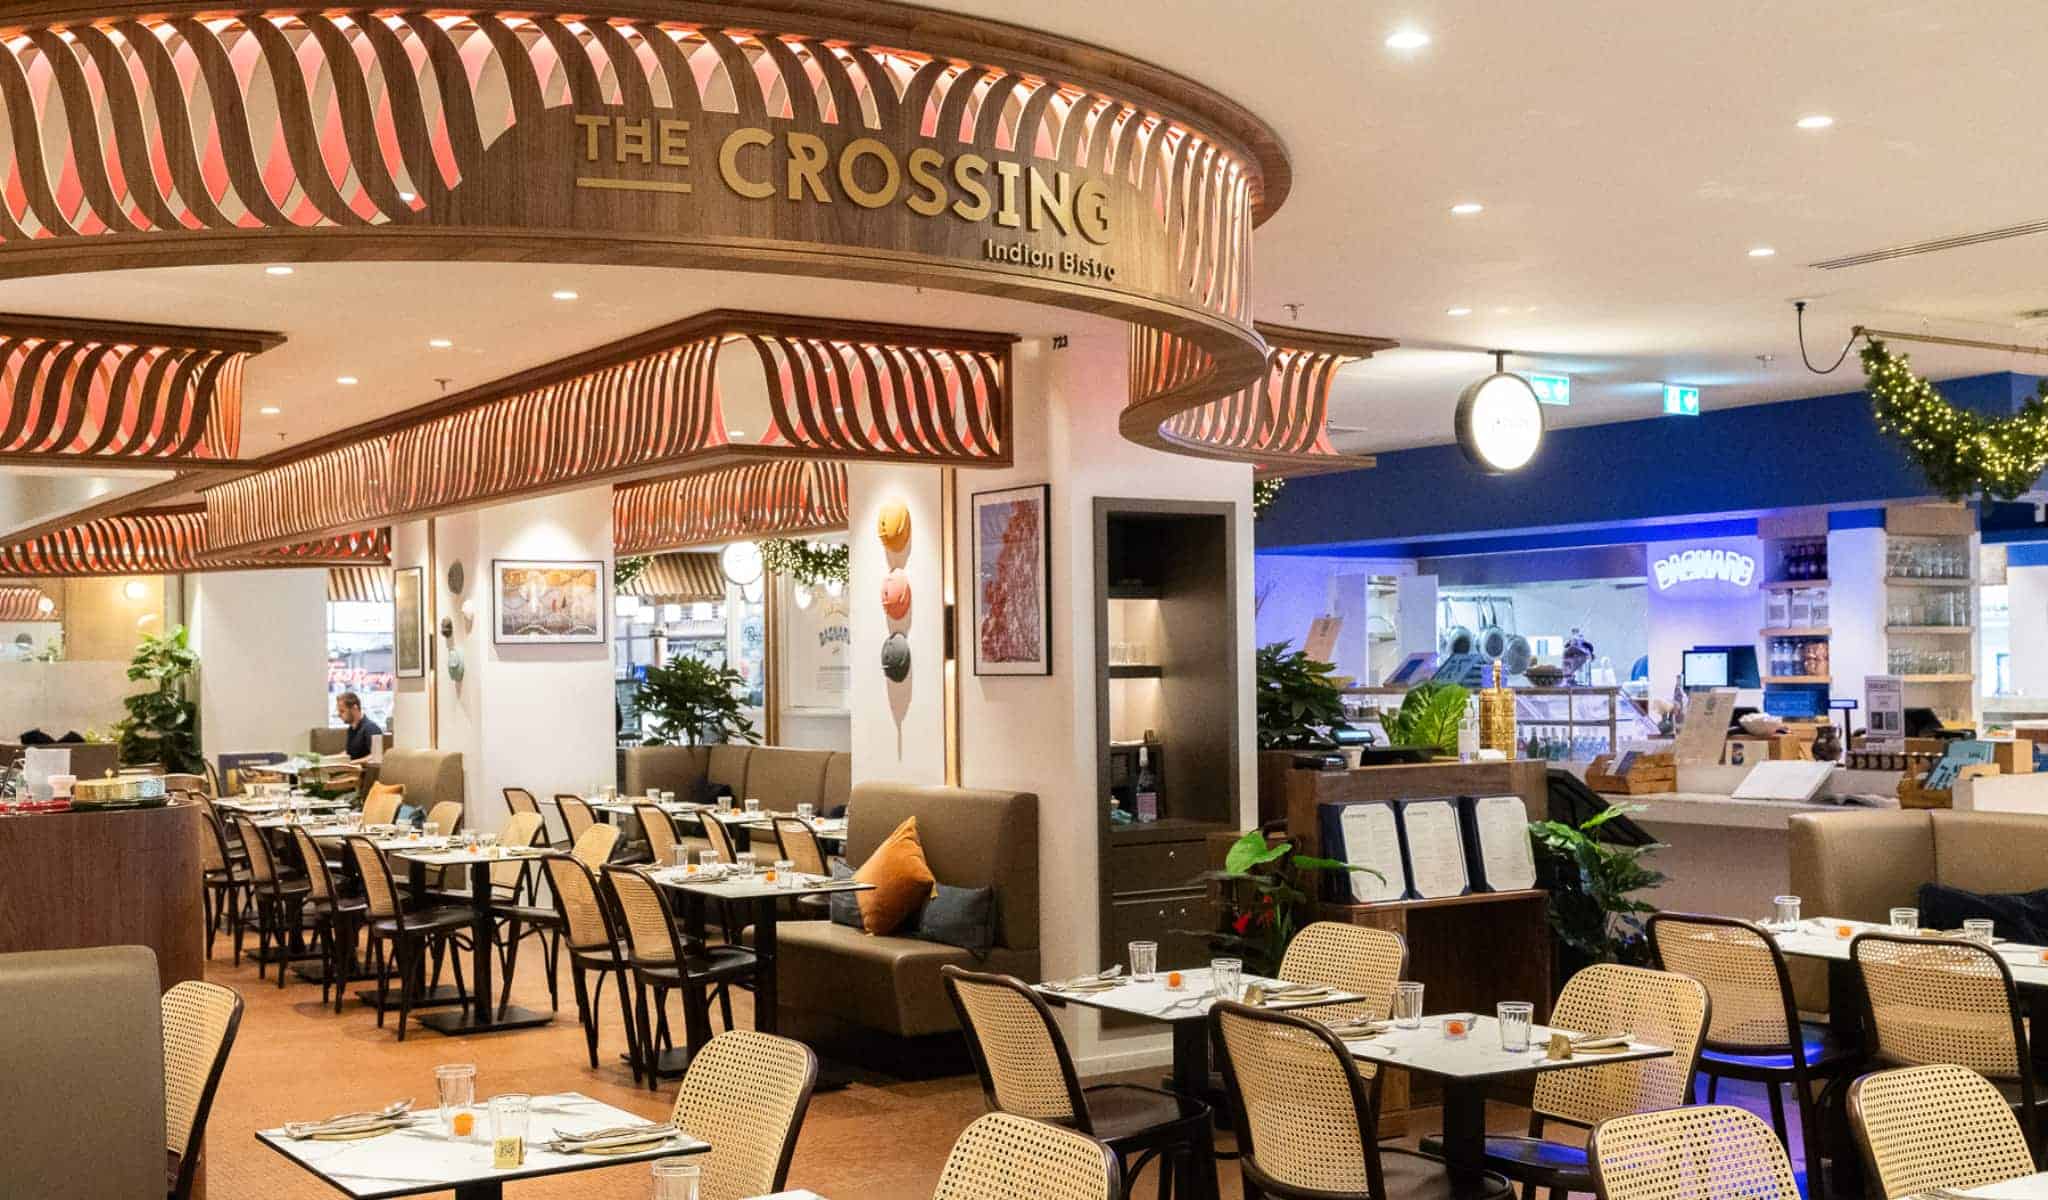 The interiors of the restaurant The Crossing by Jitin Joshi at Galeries Lafayette